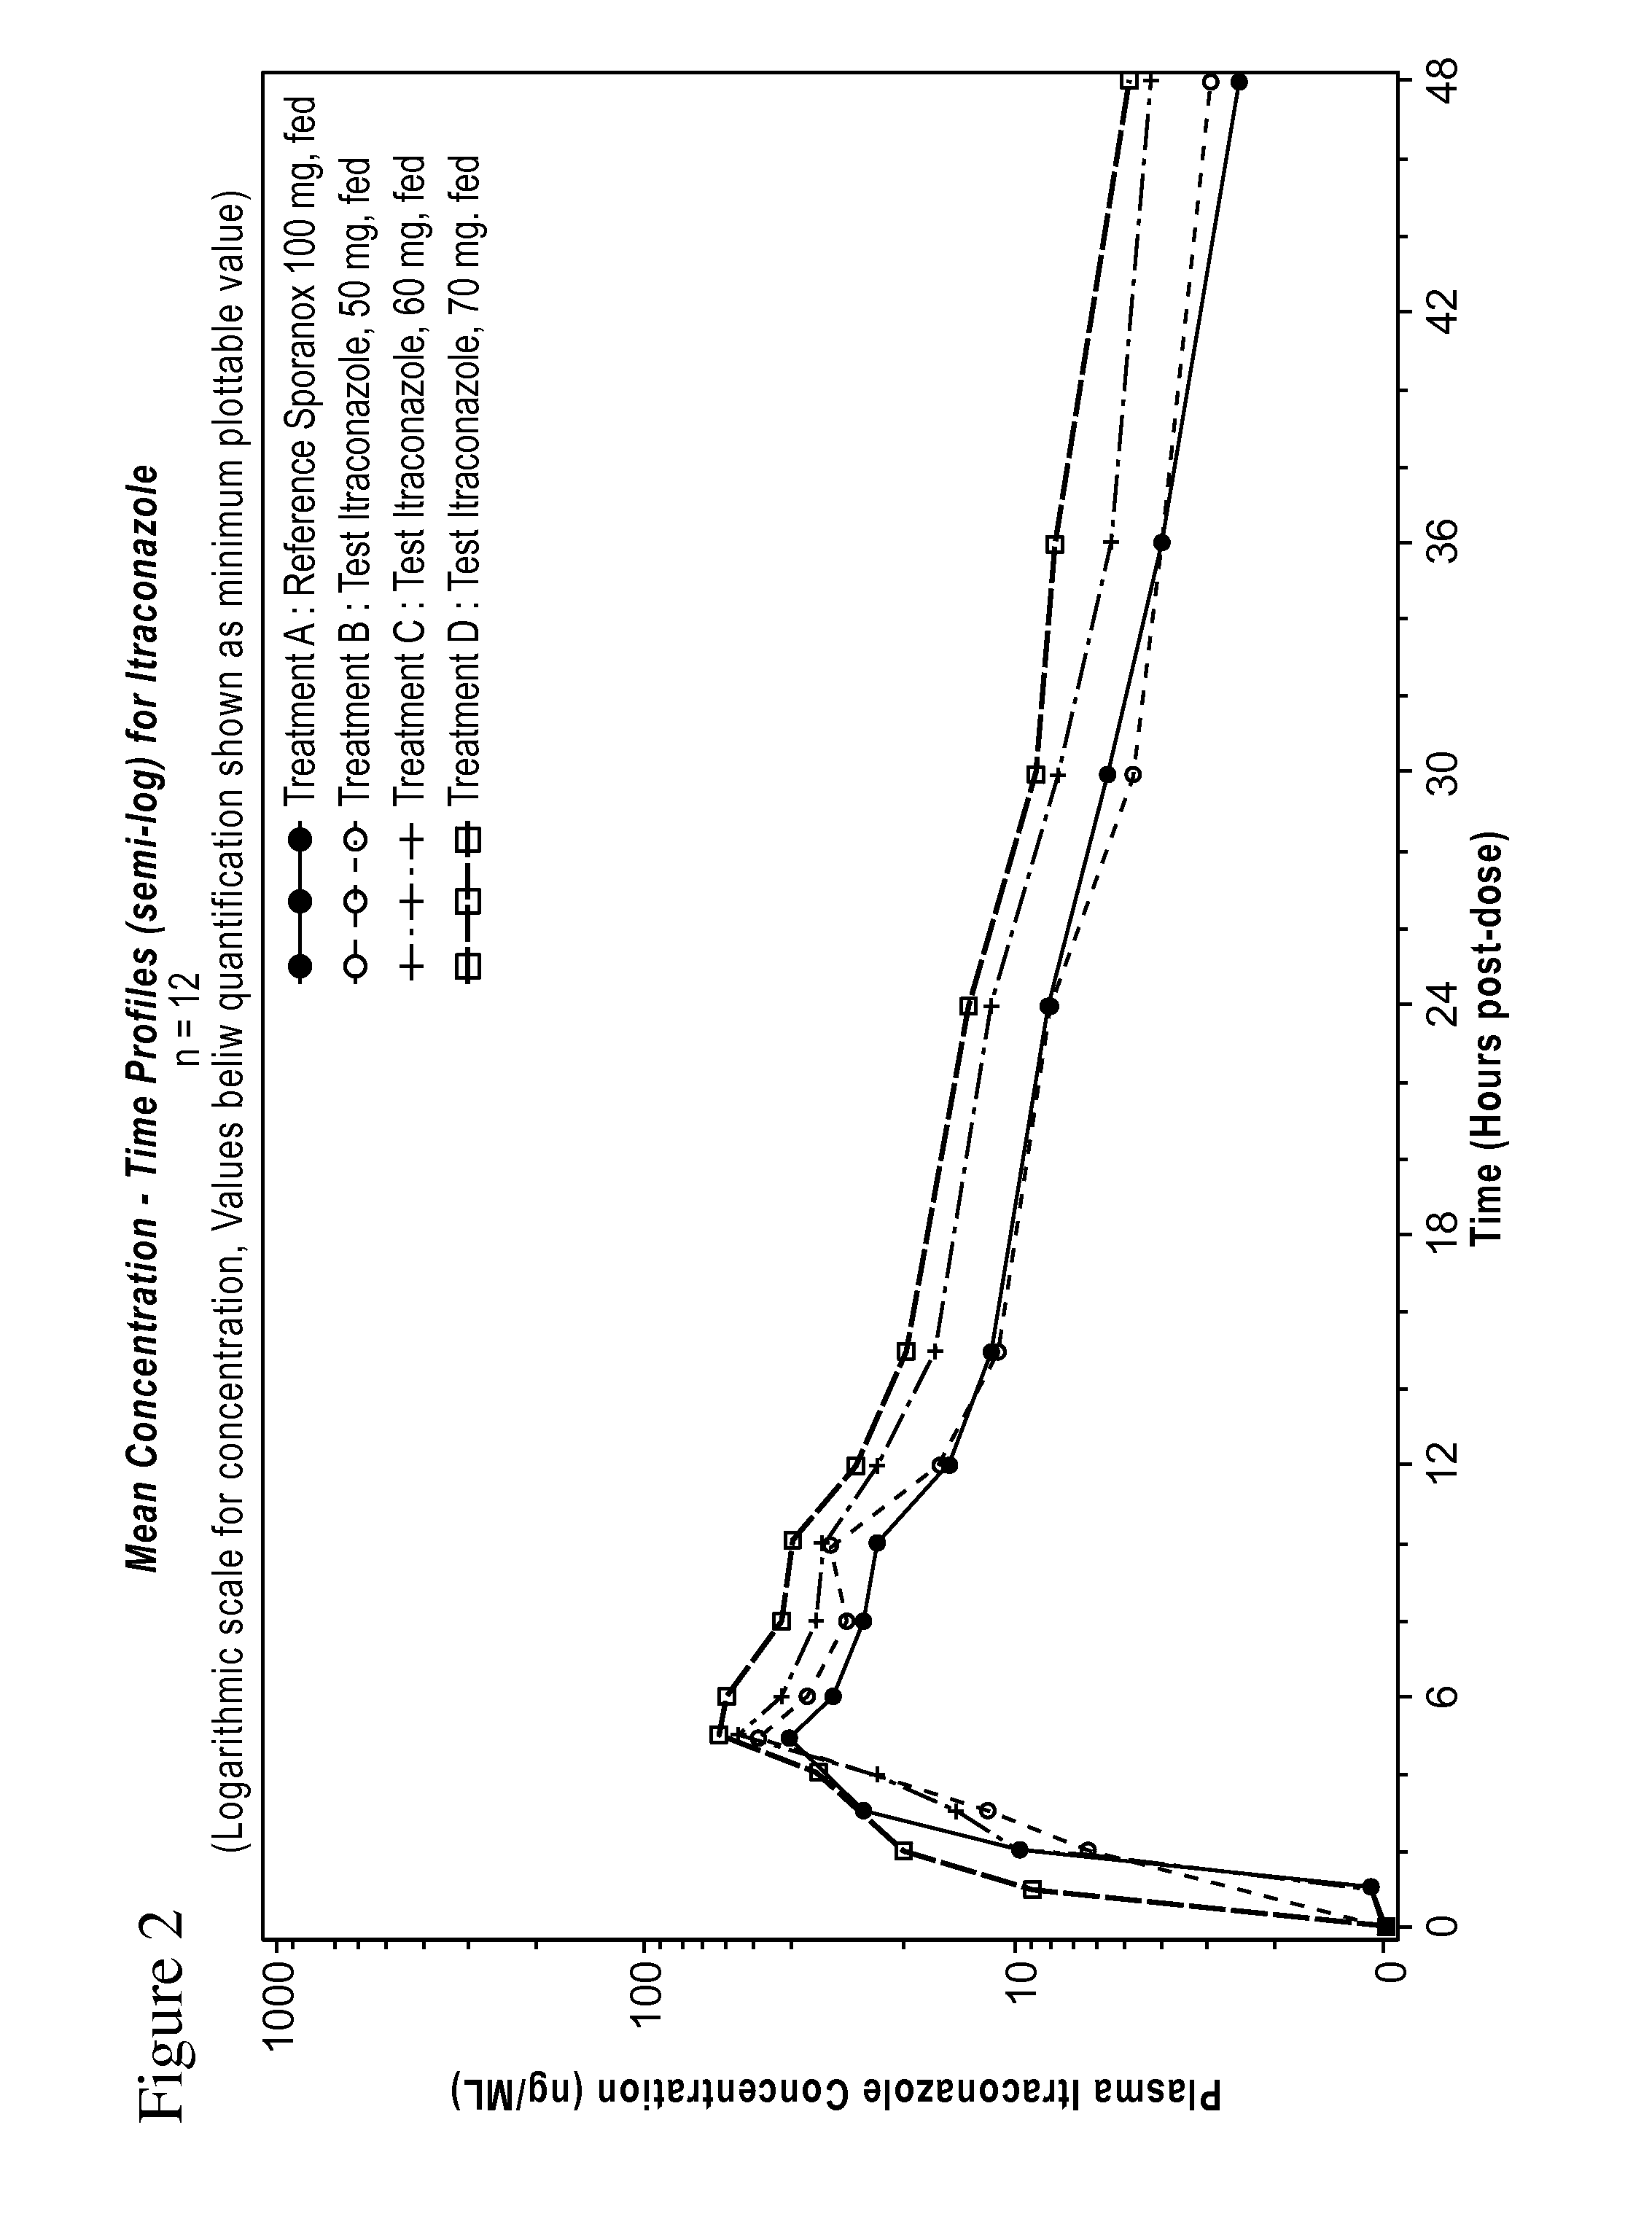 Itraconazole compositions and dosage forms, and methods of using the same